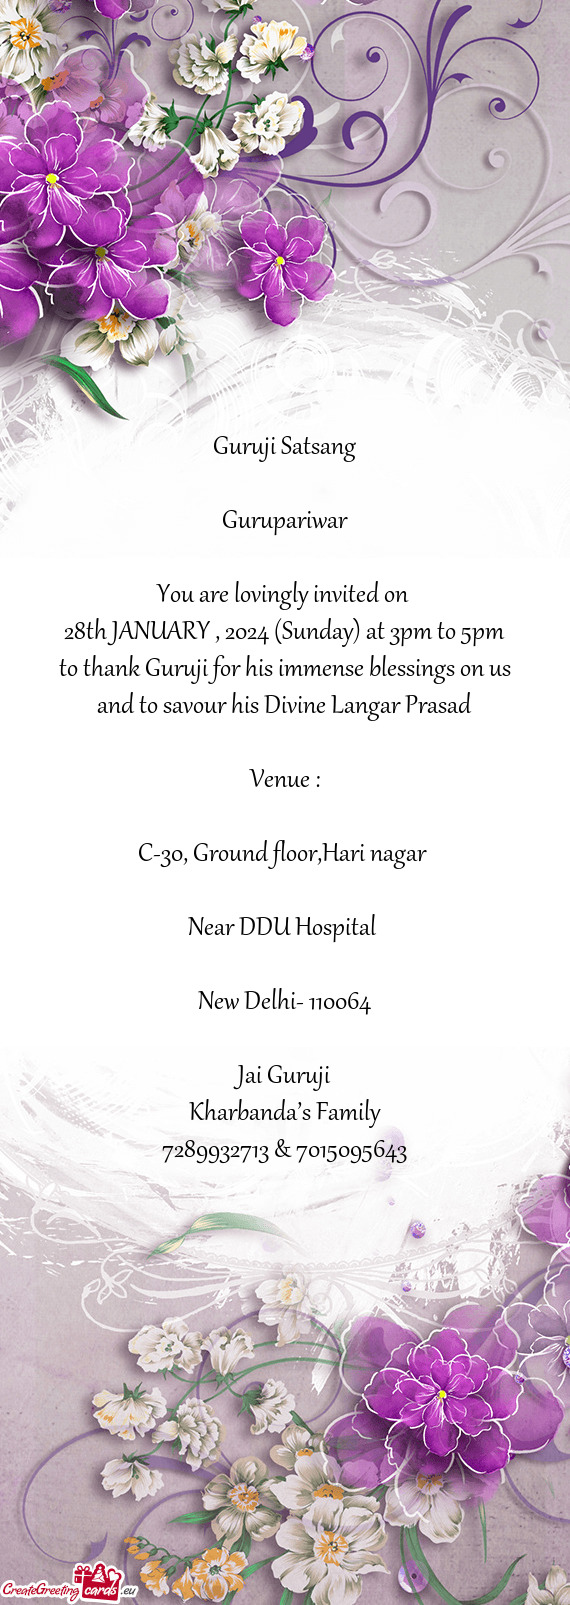 28th JANUARY , 2024 (Sunday) at 3pm to 5pm